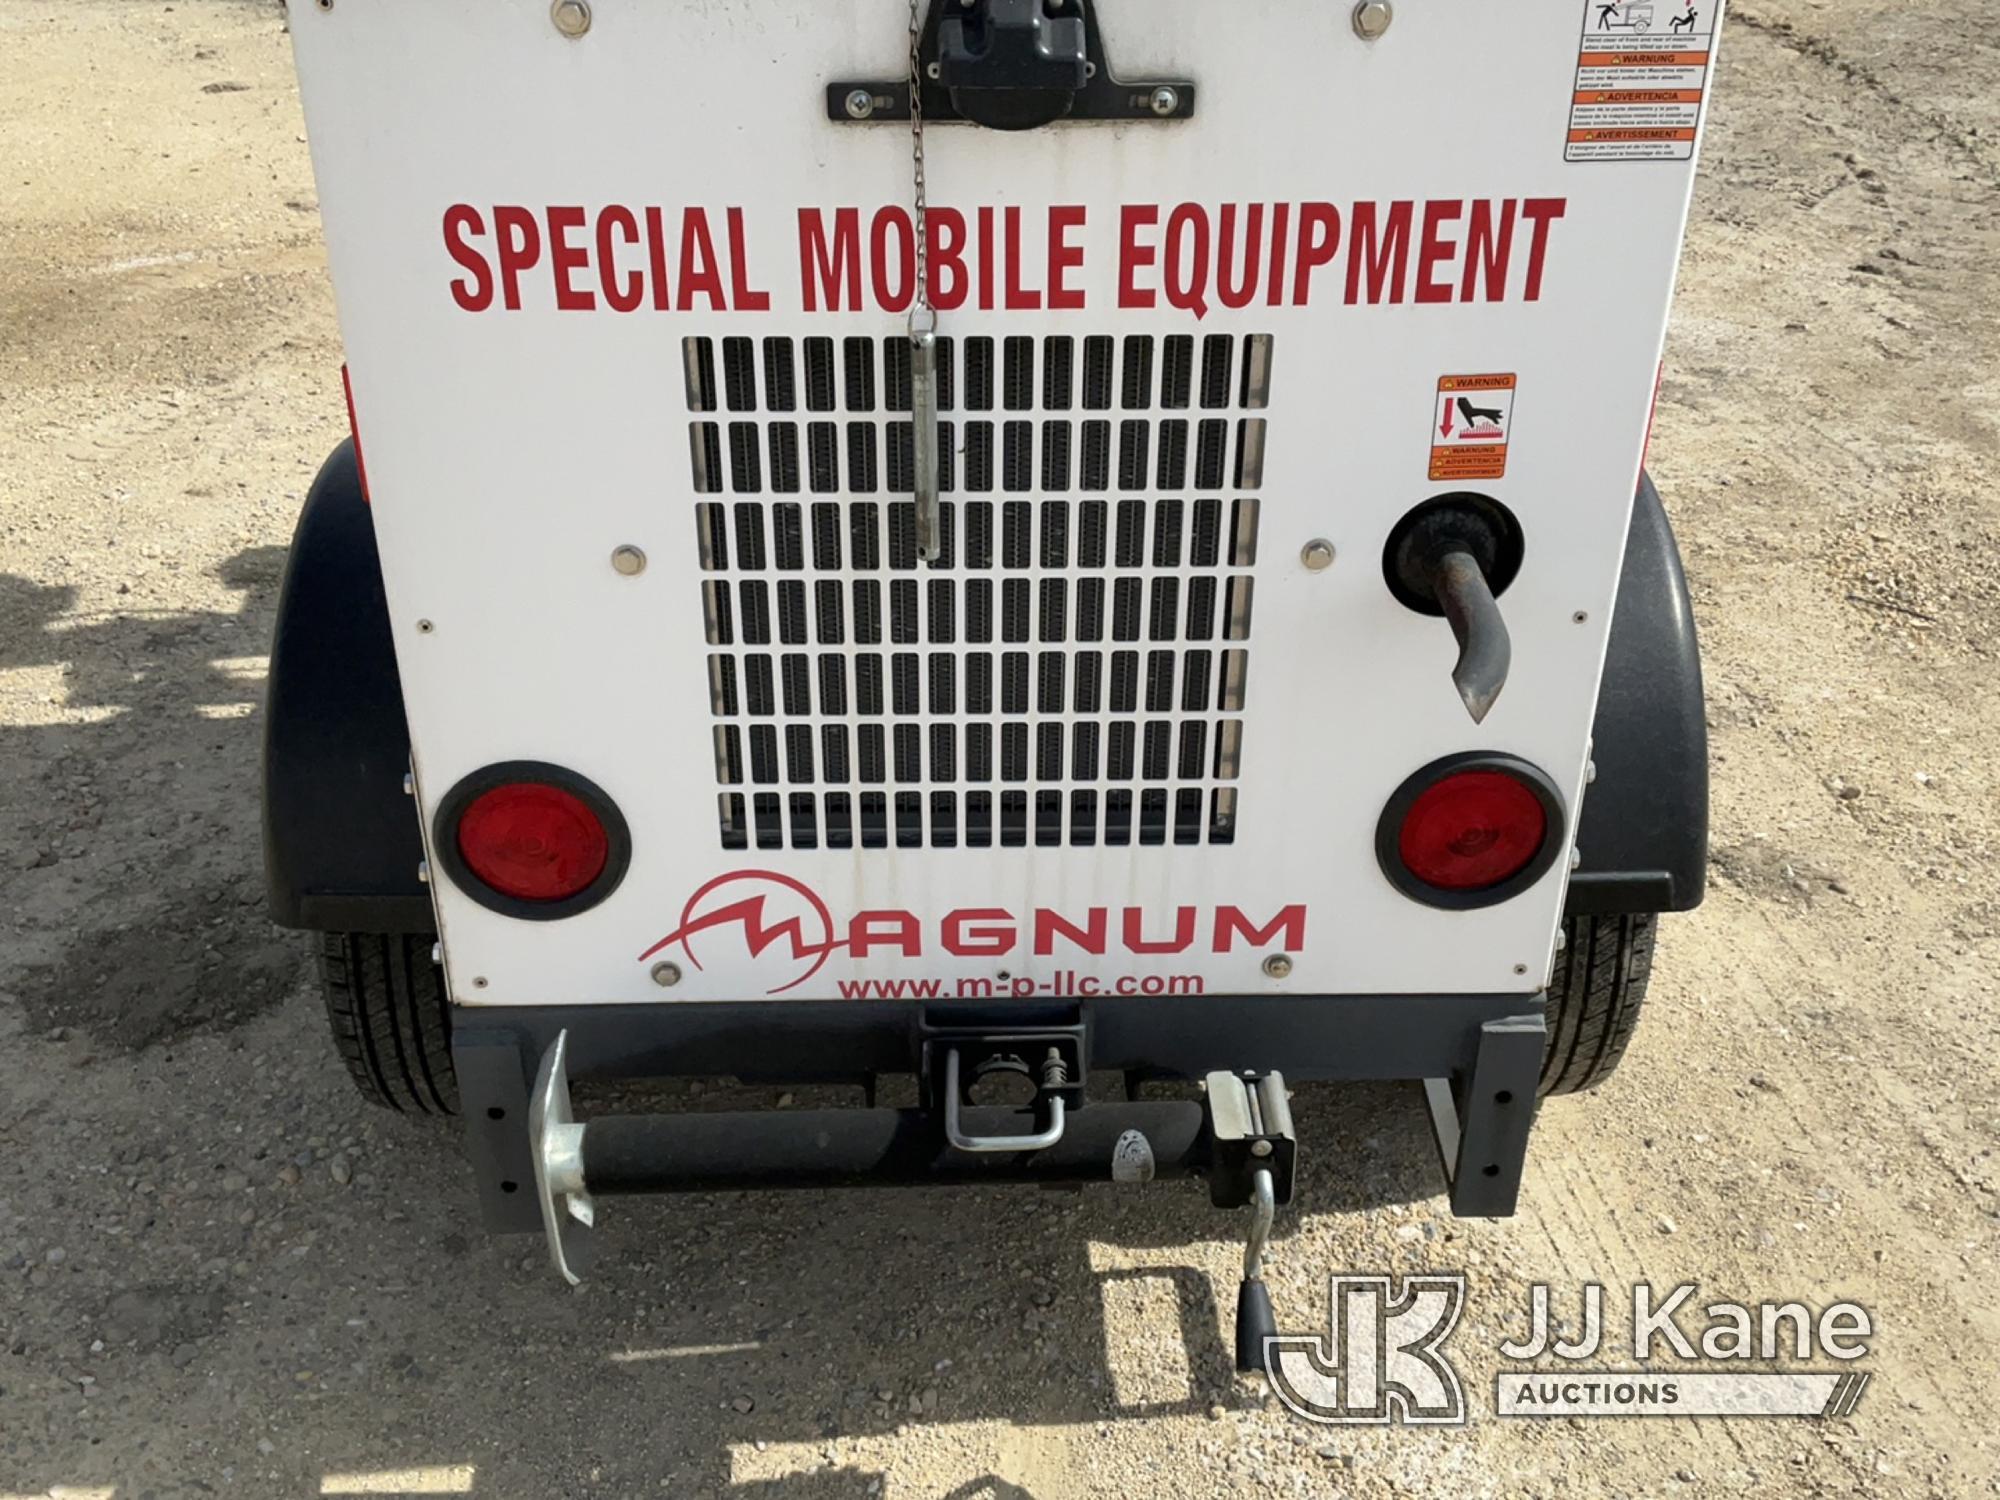 (South Beloit, IL) 2012 Magnum Products Portable Light Tower No Title) (Runs, Lights Turn On